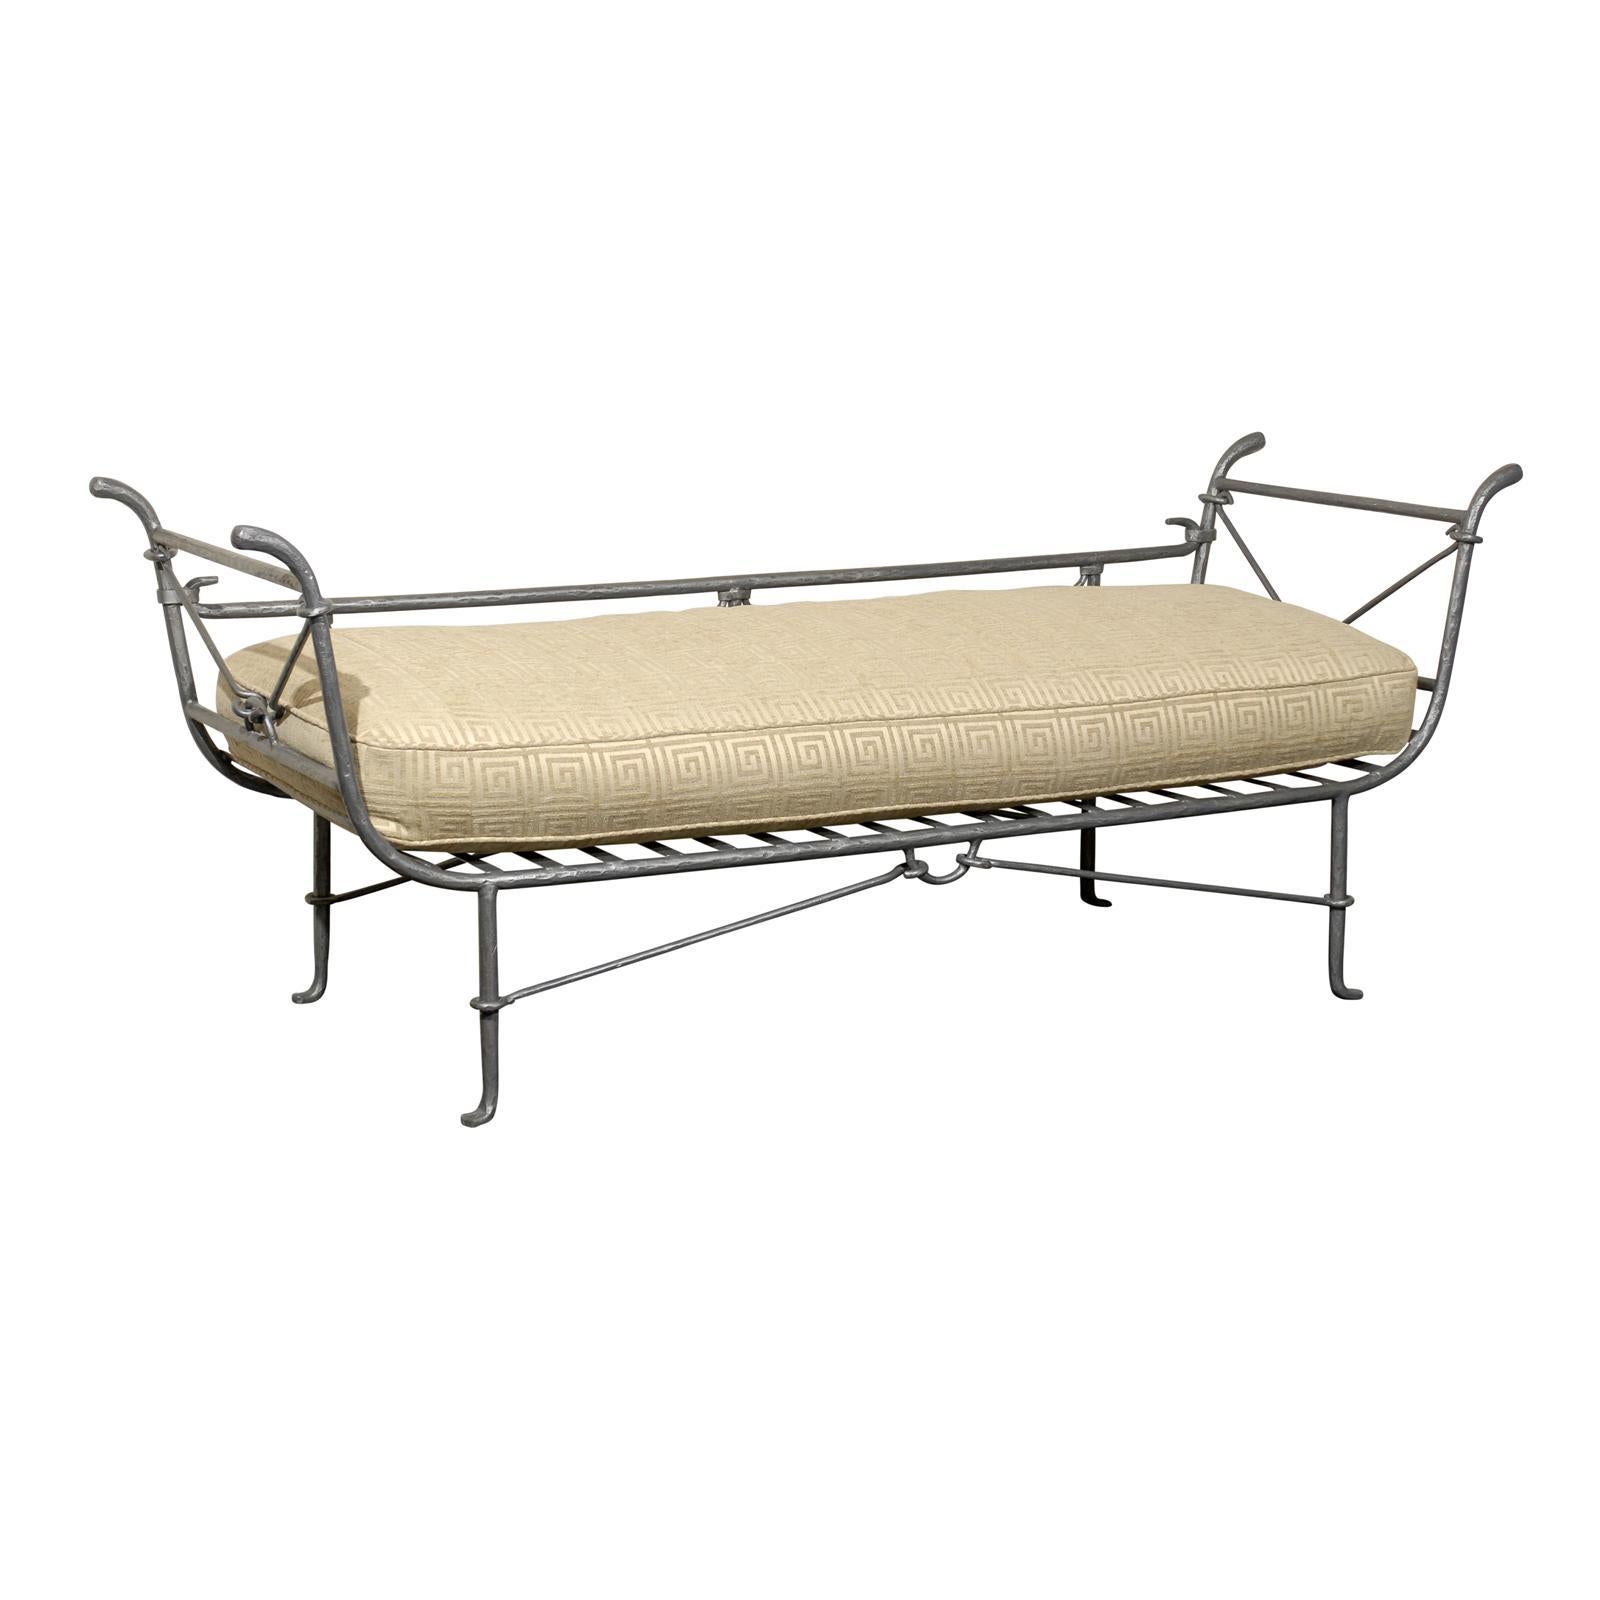 One of a Kind American Iron Daybed with Greek Key Cushion